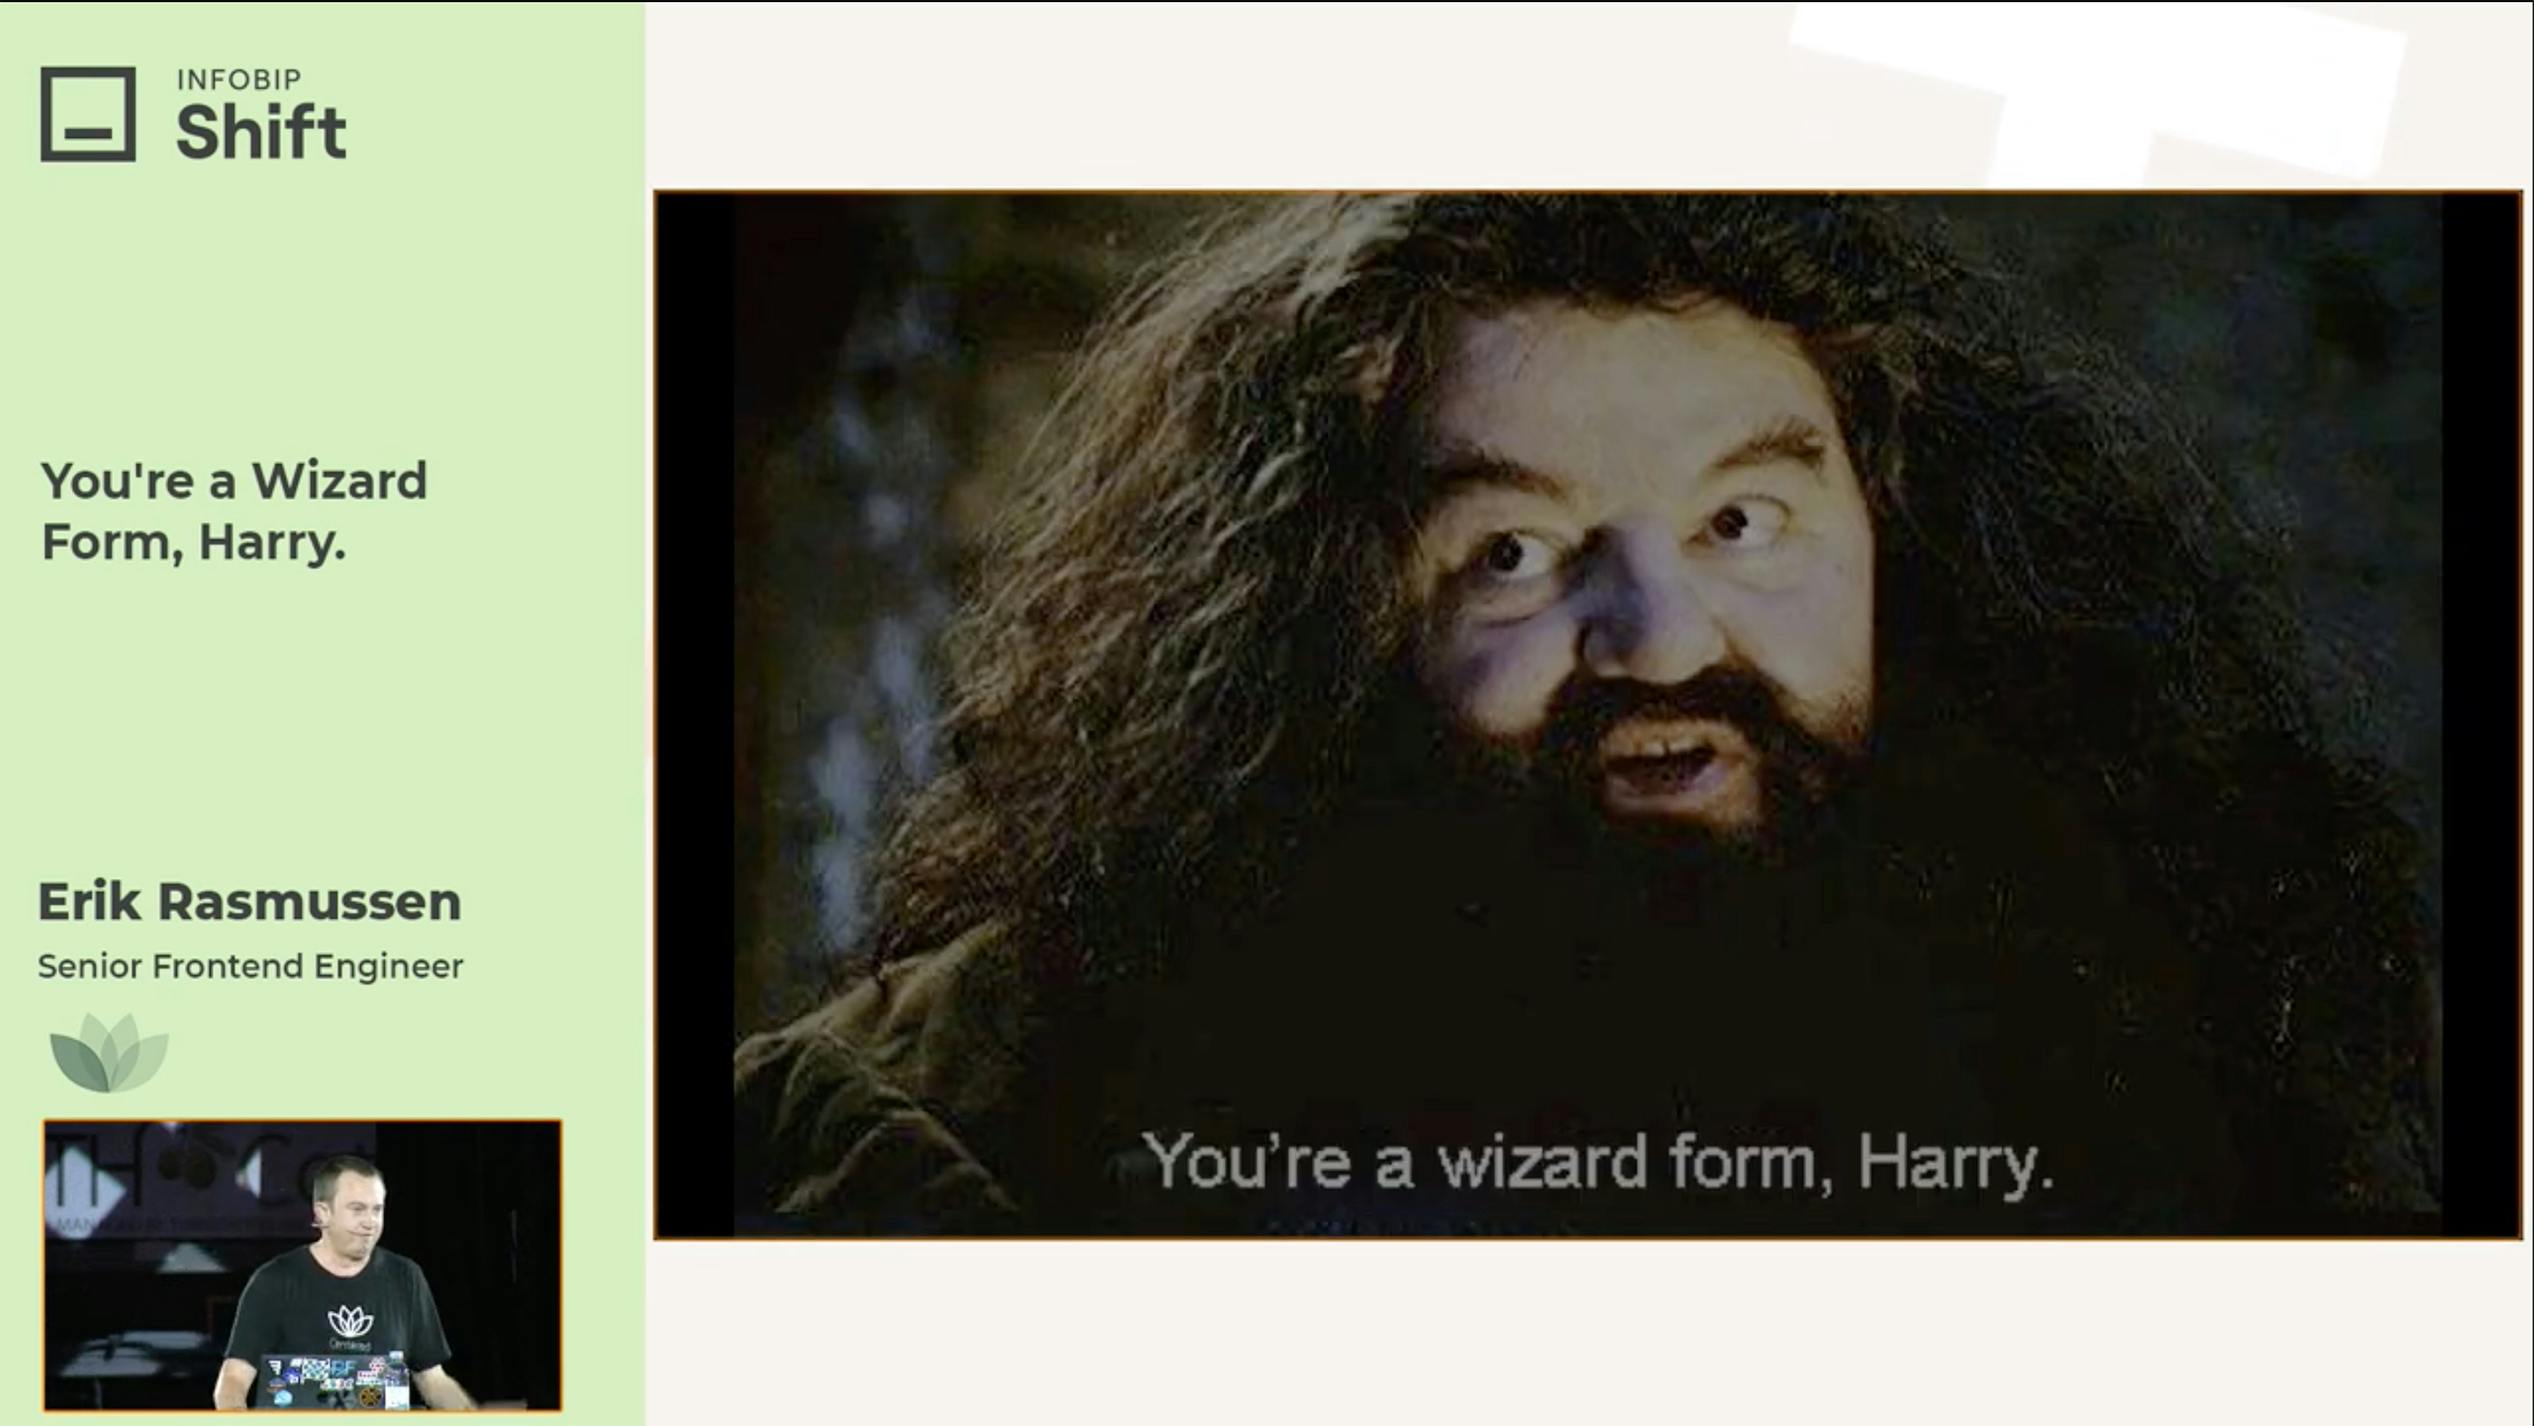 You're a Wizard Form, Harry.